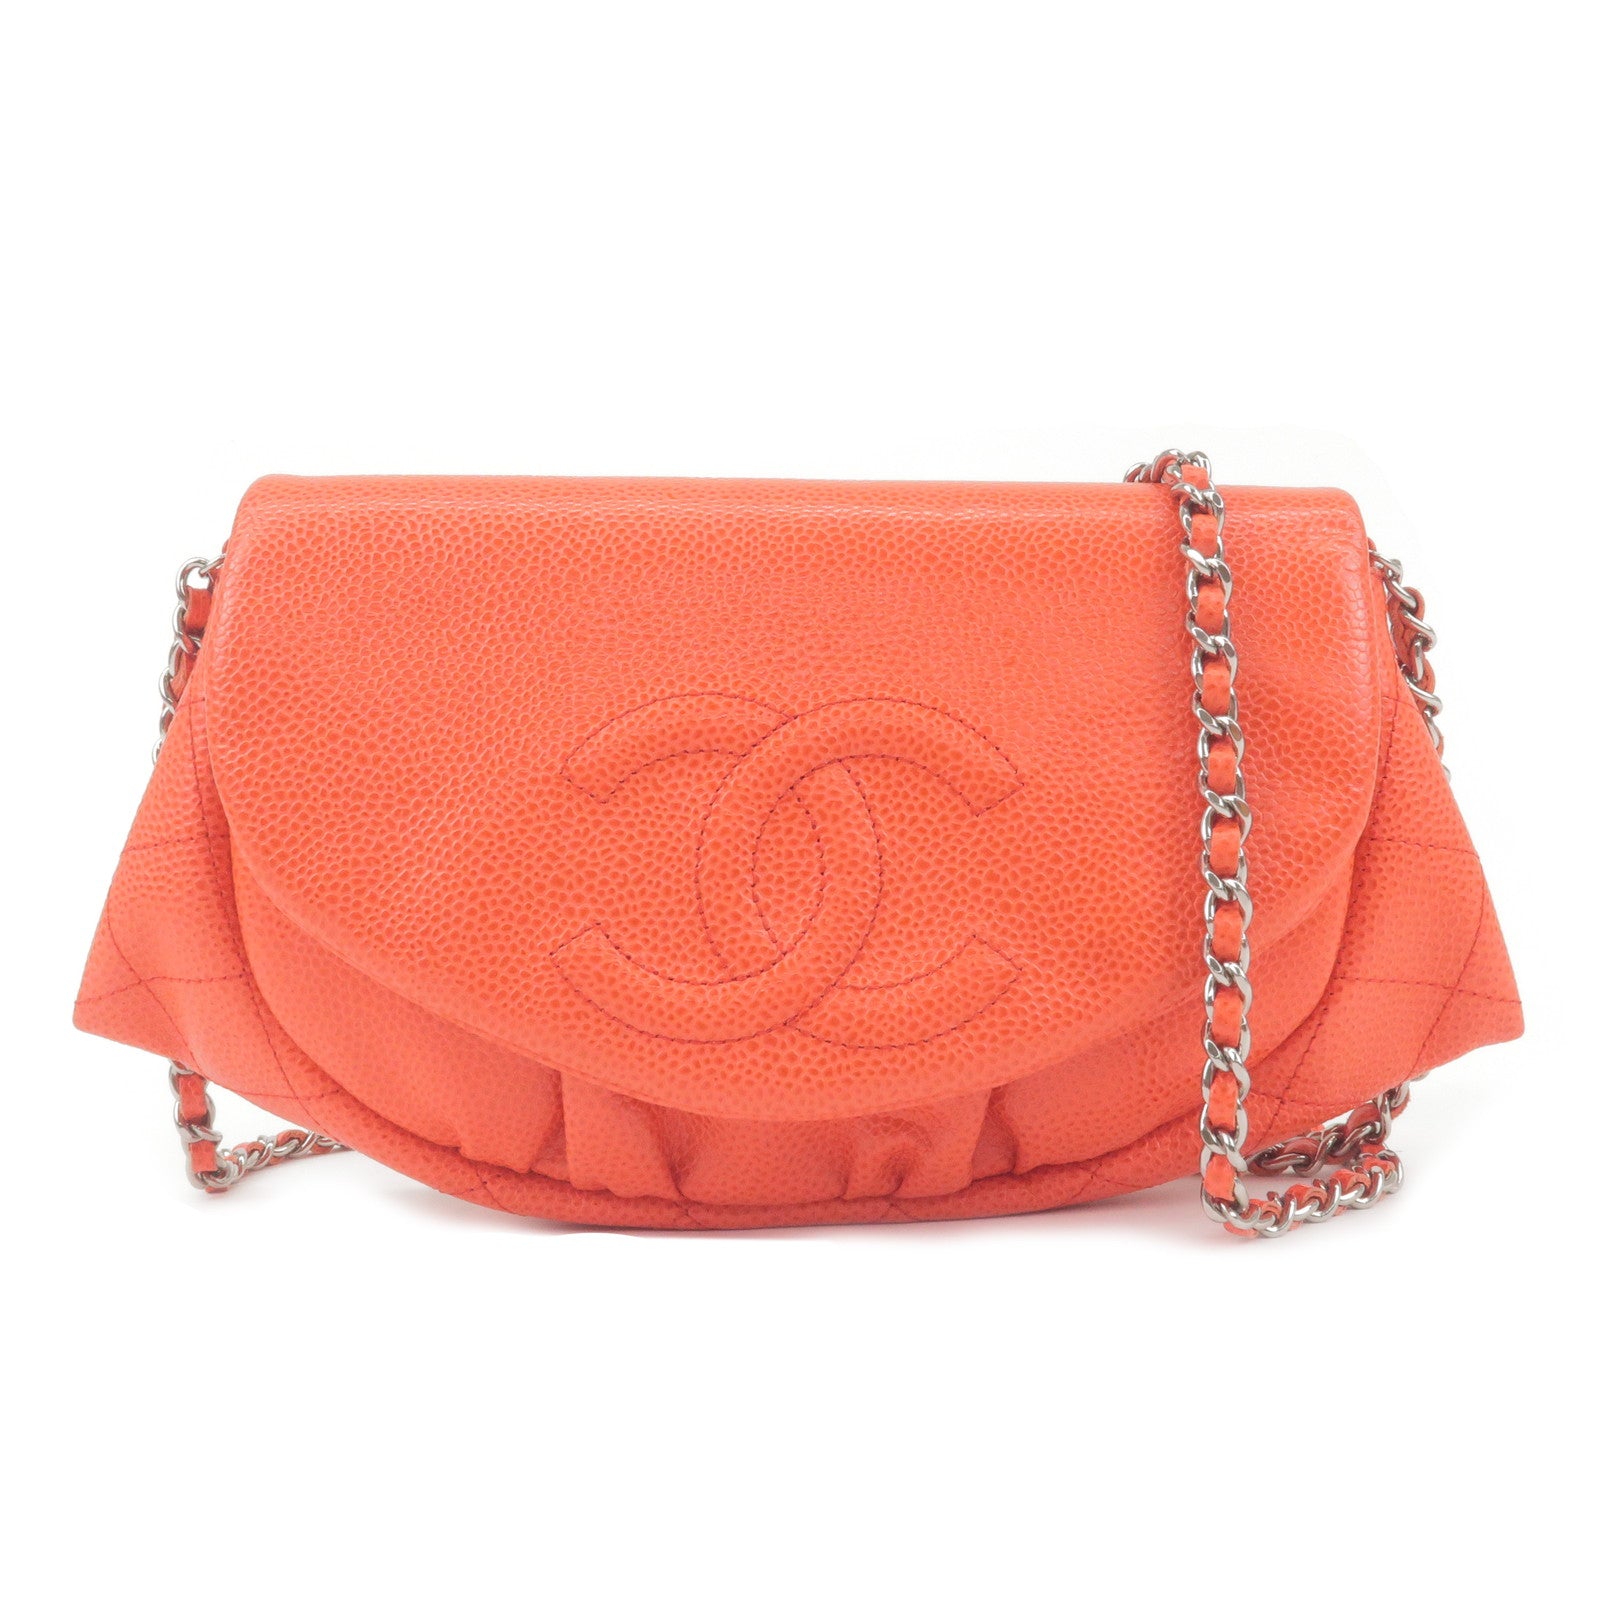 Chanel Black Caviar Leather Half Moon Wallet On Chain Chanel